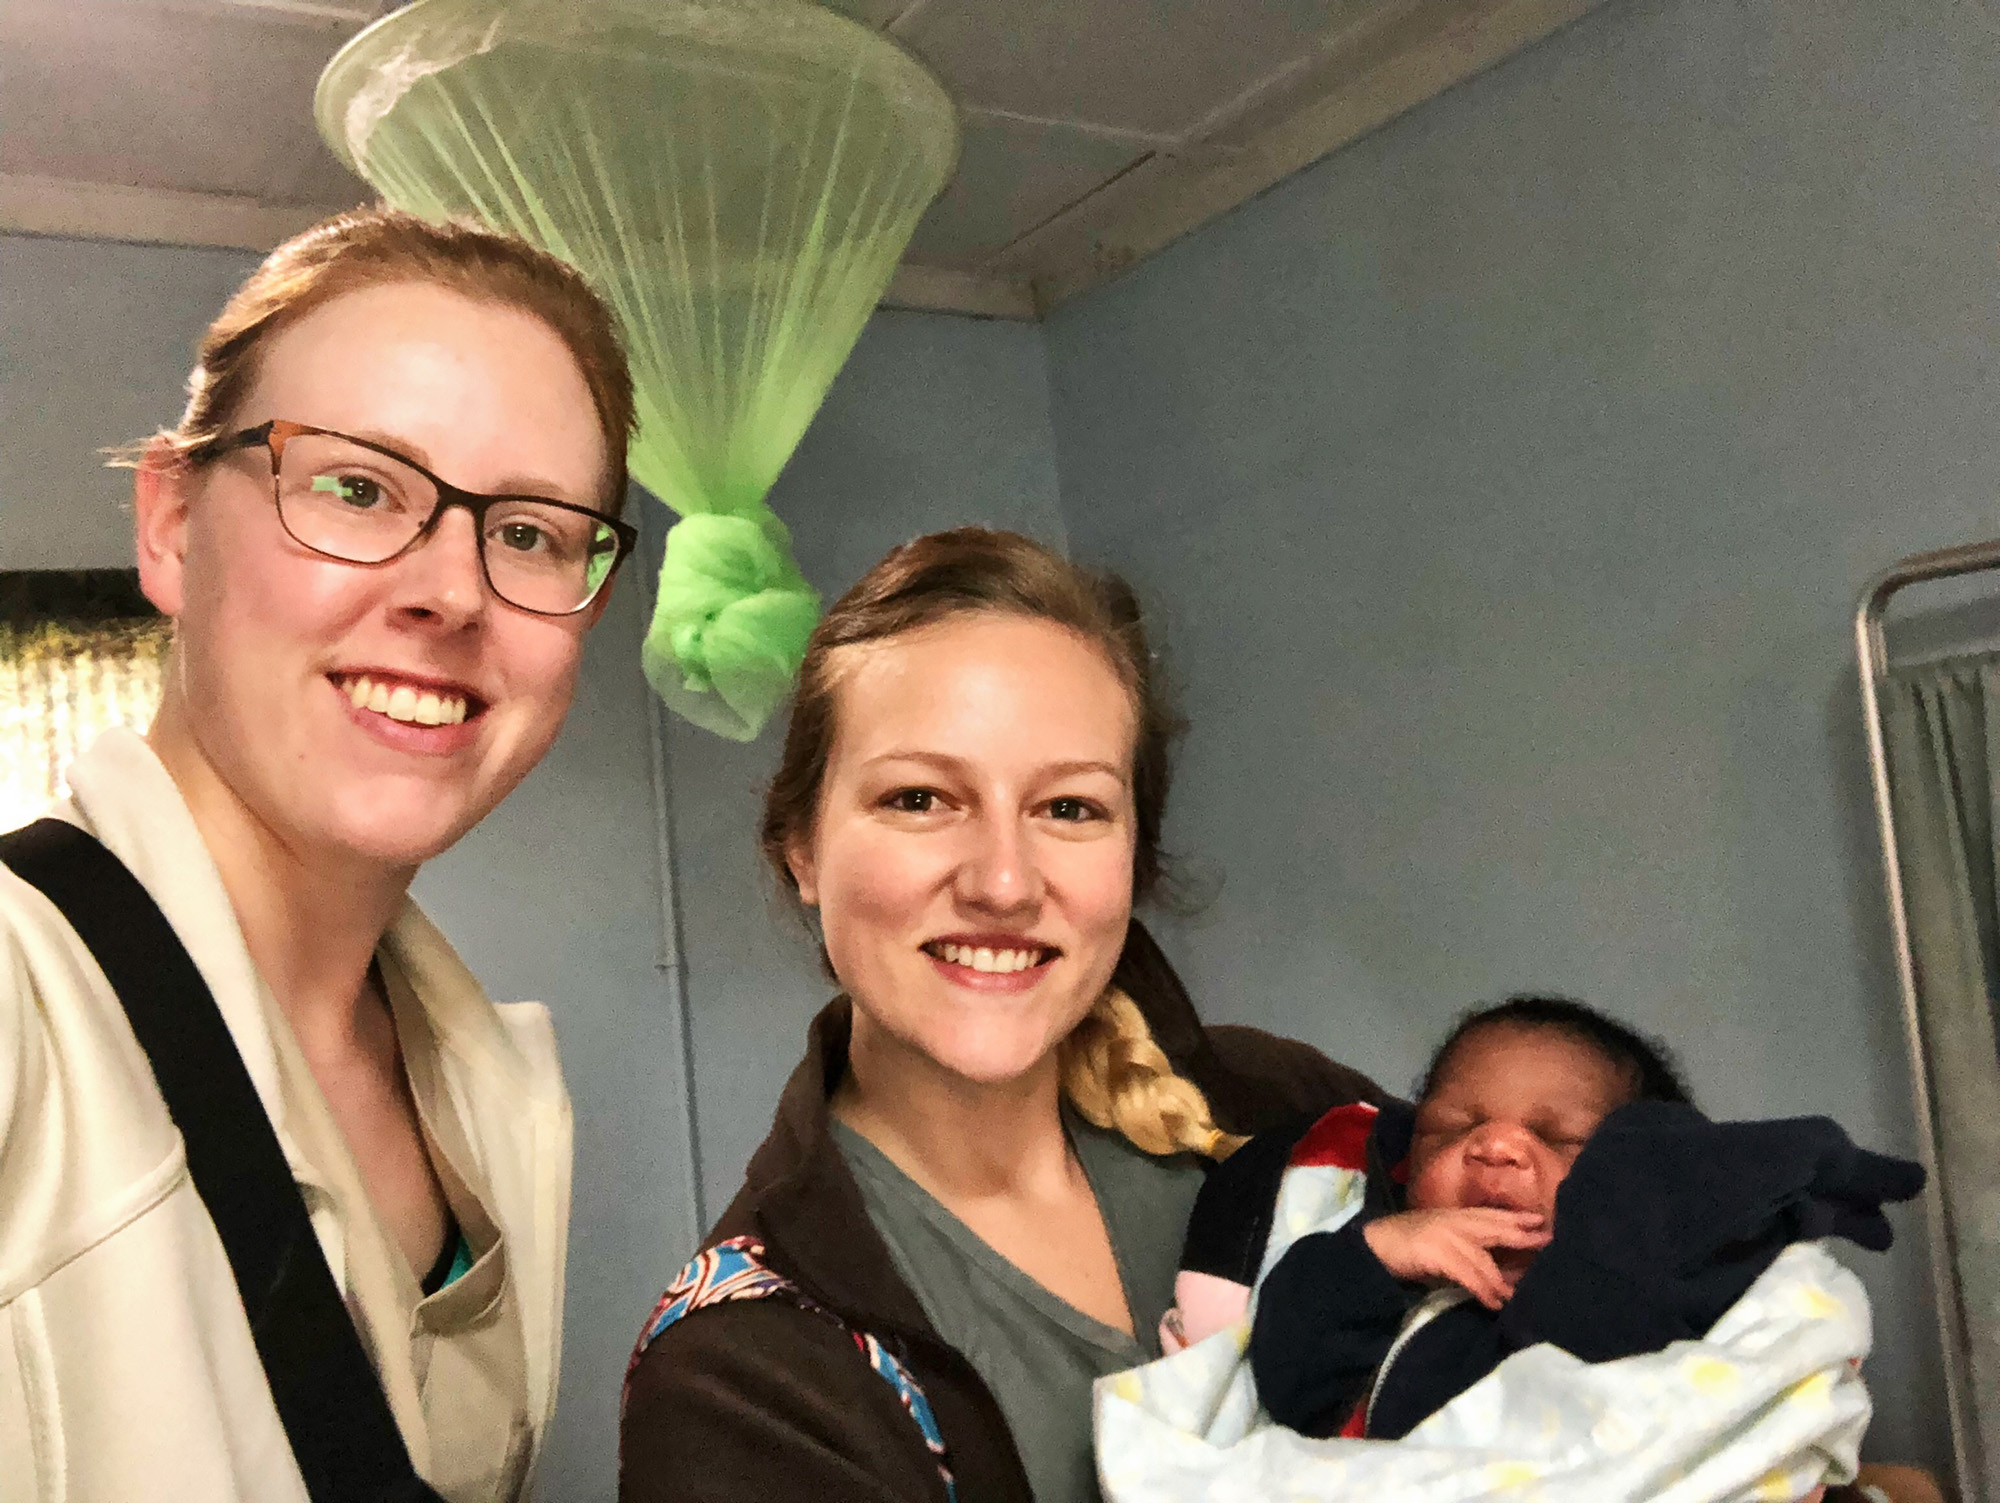 UNK student Michaela Walker, left, and UNK graduate Tessa Copp are pictured with a baby they helped deliver at the Chifundo Rural Health Center in Zambia. (Courtesy photo)